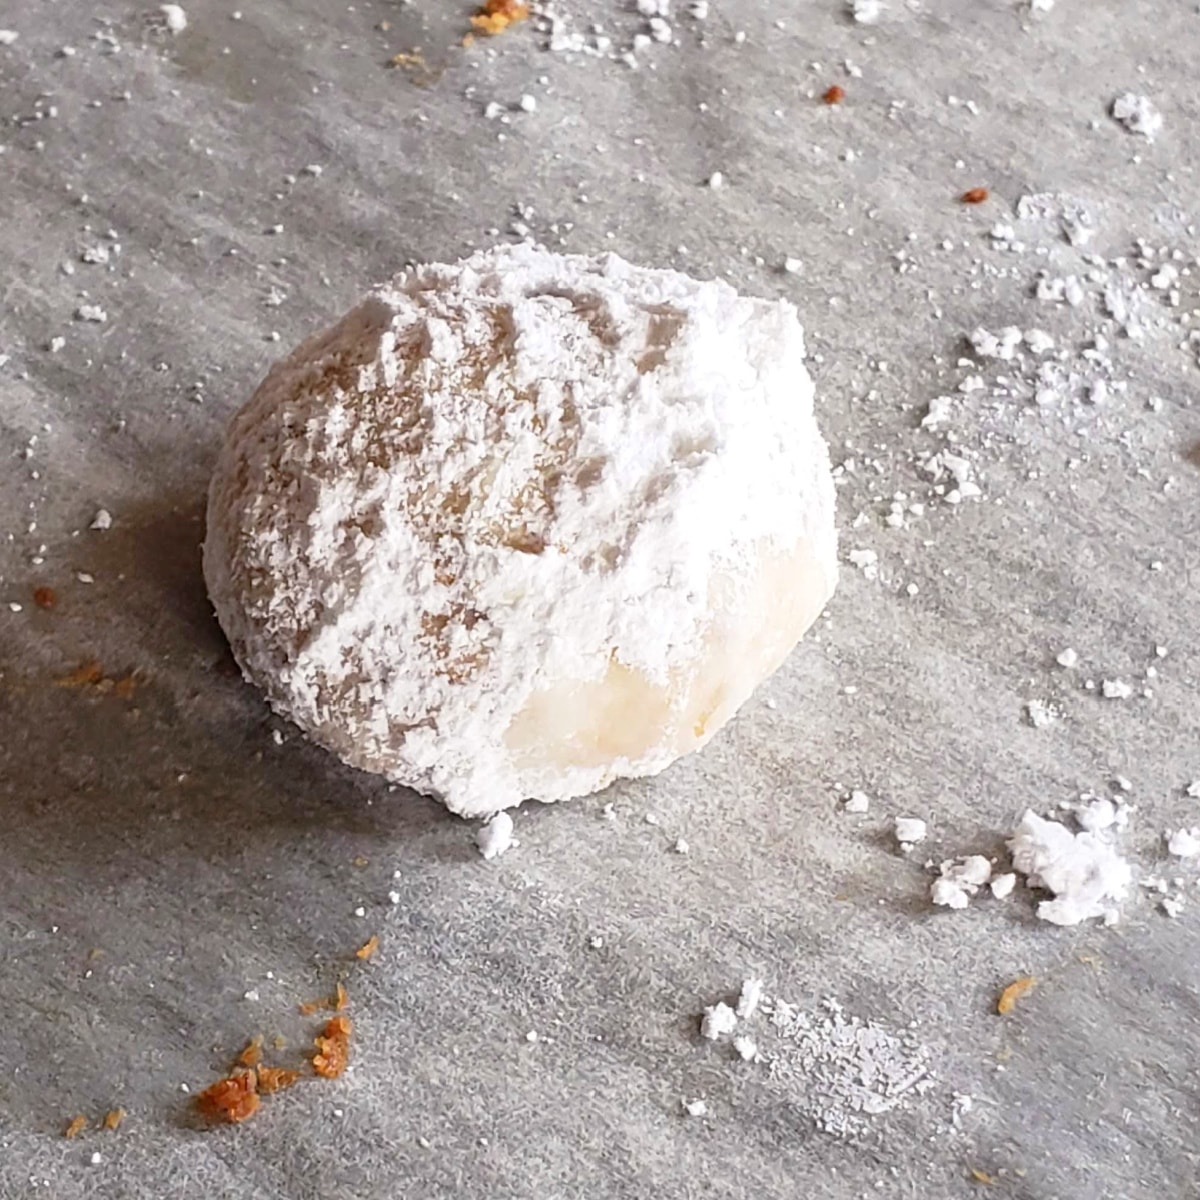 White Mexican Wedding Cookie covered in powdered sugar on a parchment-lined baking sheet